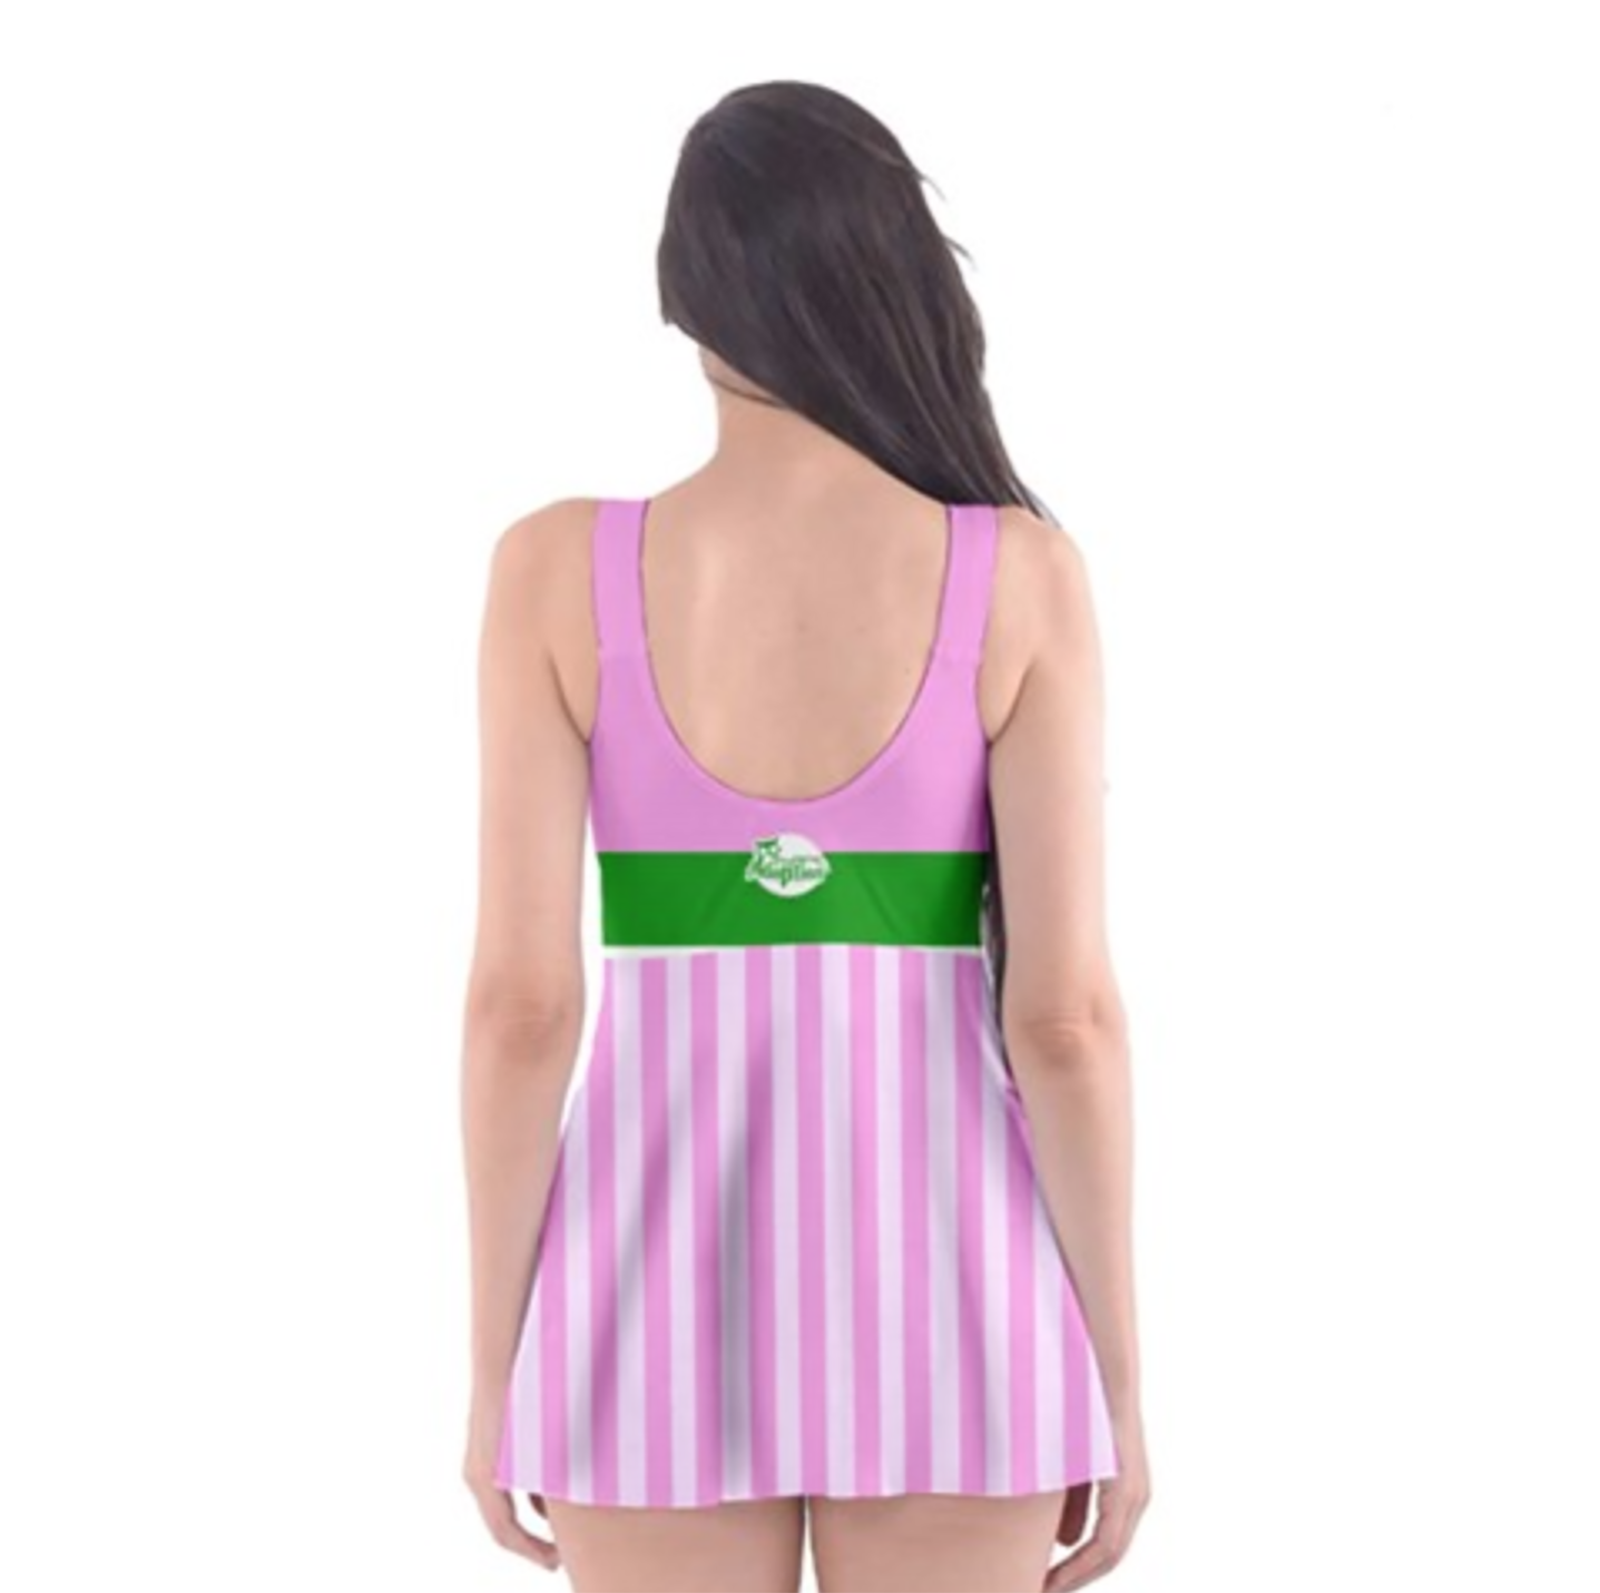 Candy Store Owl Skater Dress Swimsuit (Striped Pattern)